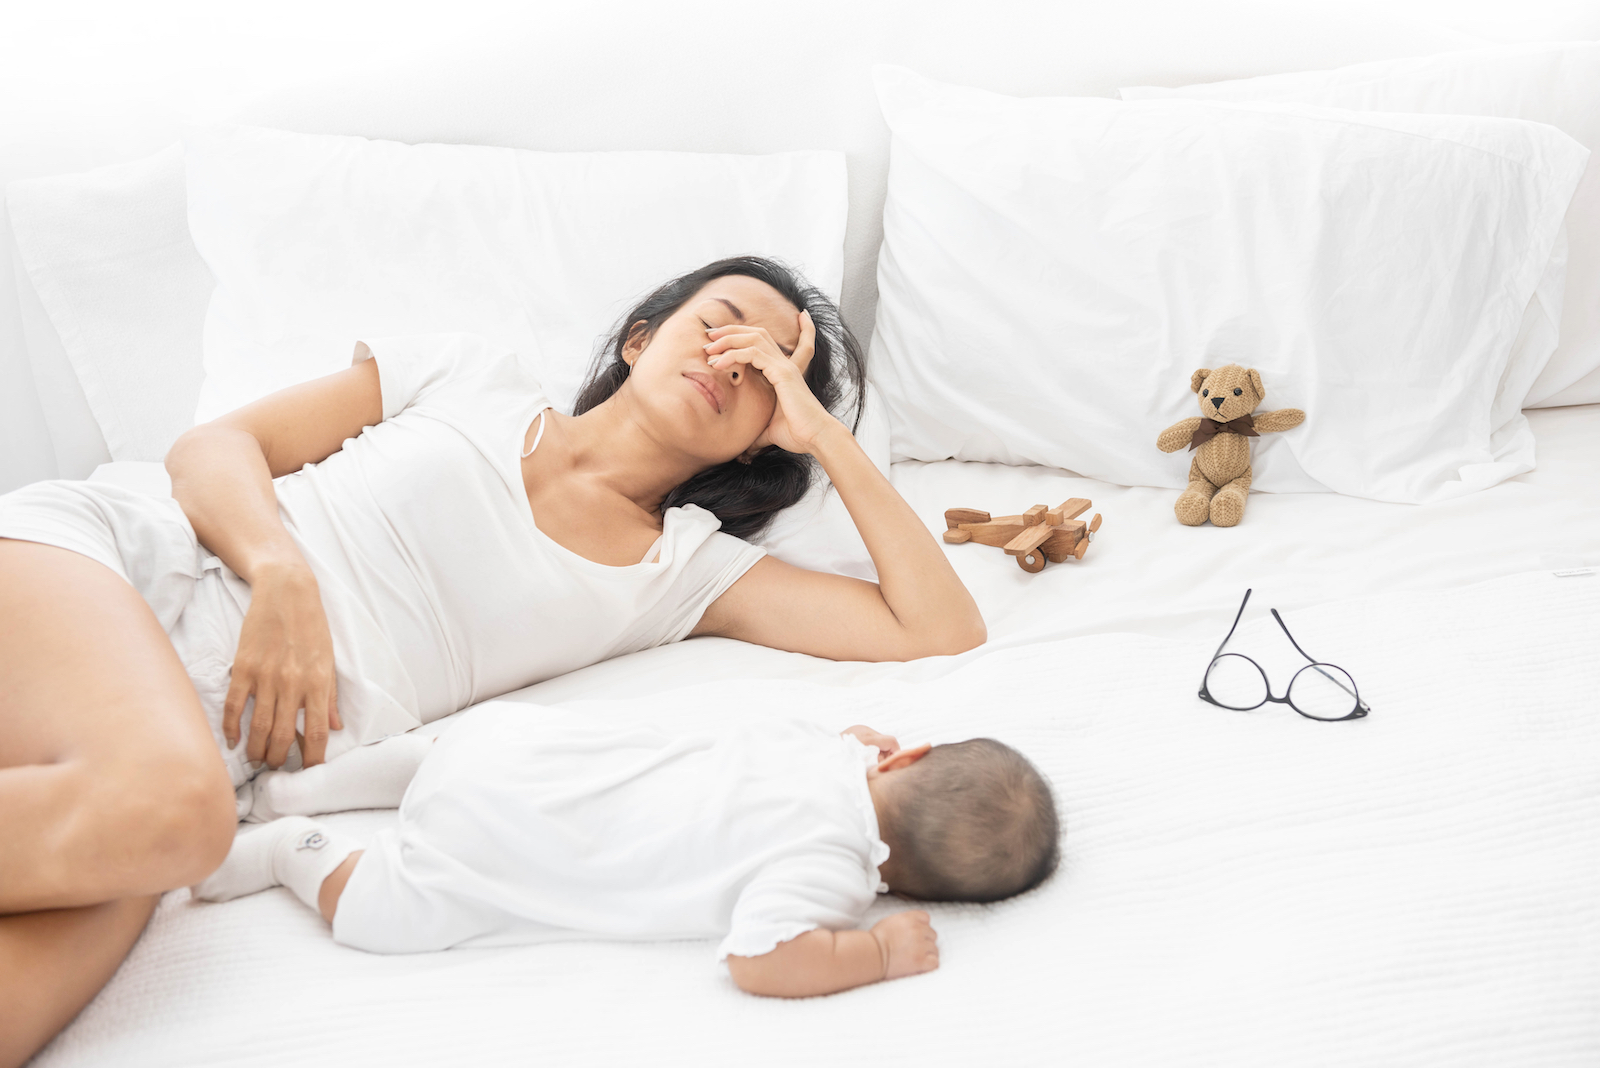 New parent trying to function on no sleep